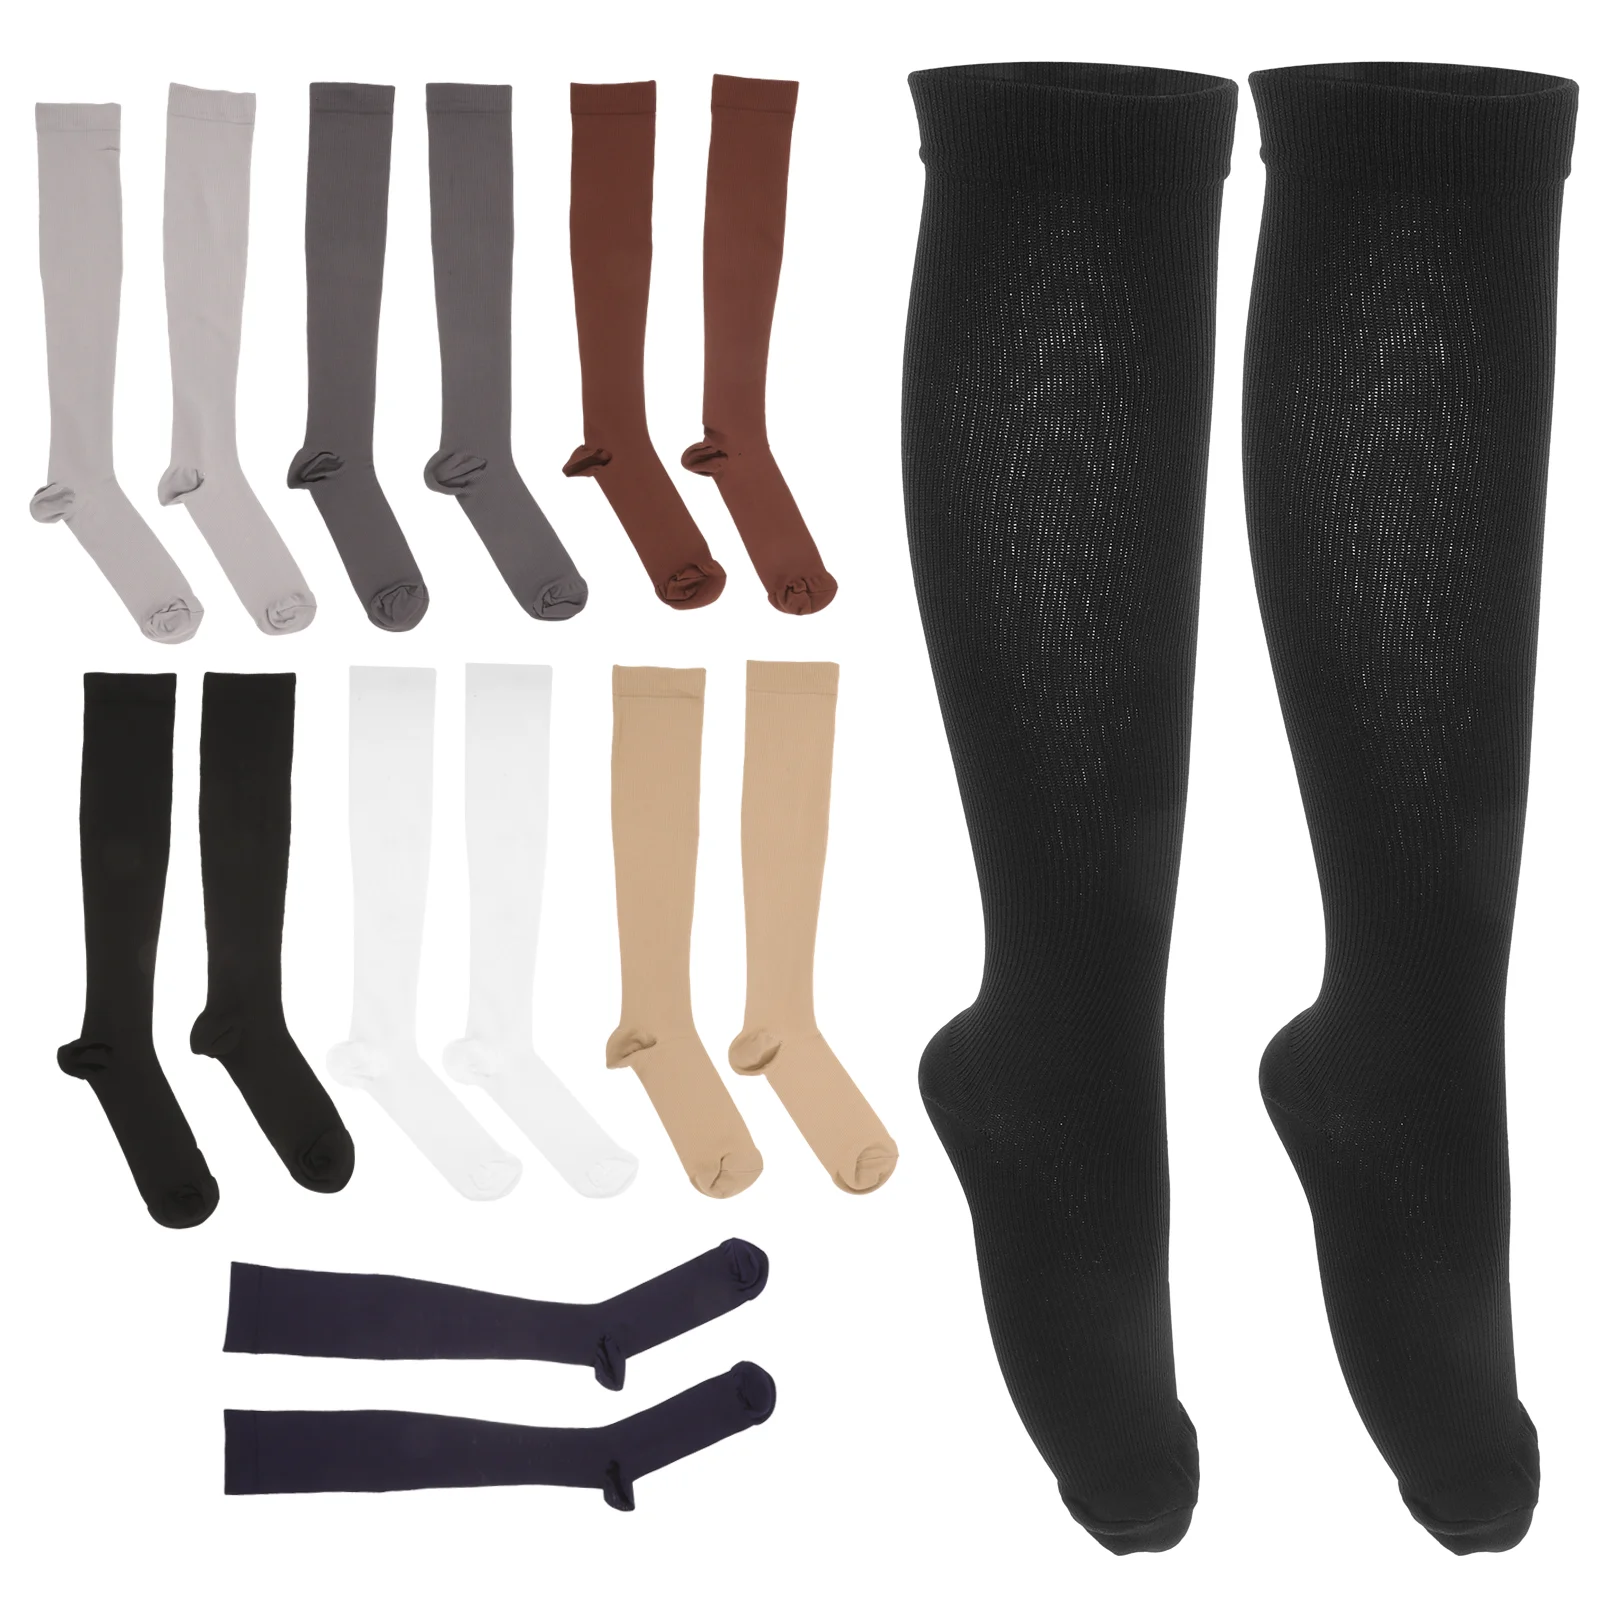 

8 Pairs Sports Socks Winter for Outdoor Ice Skating Hockey Nylon Warm Cold Weather Fitness Skate